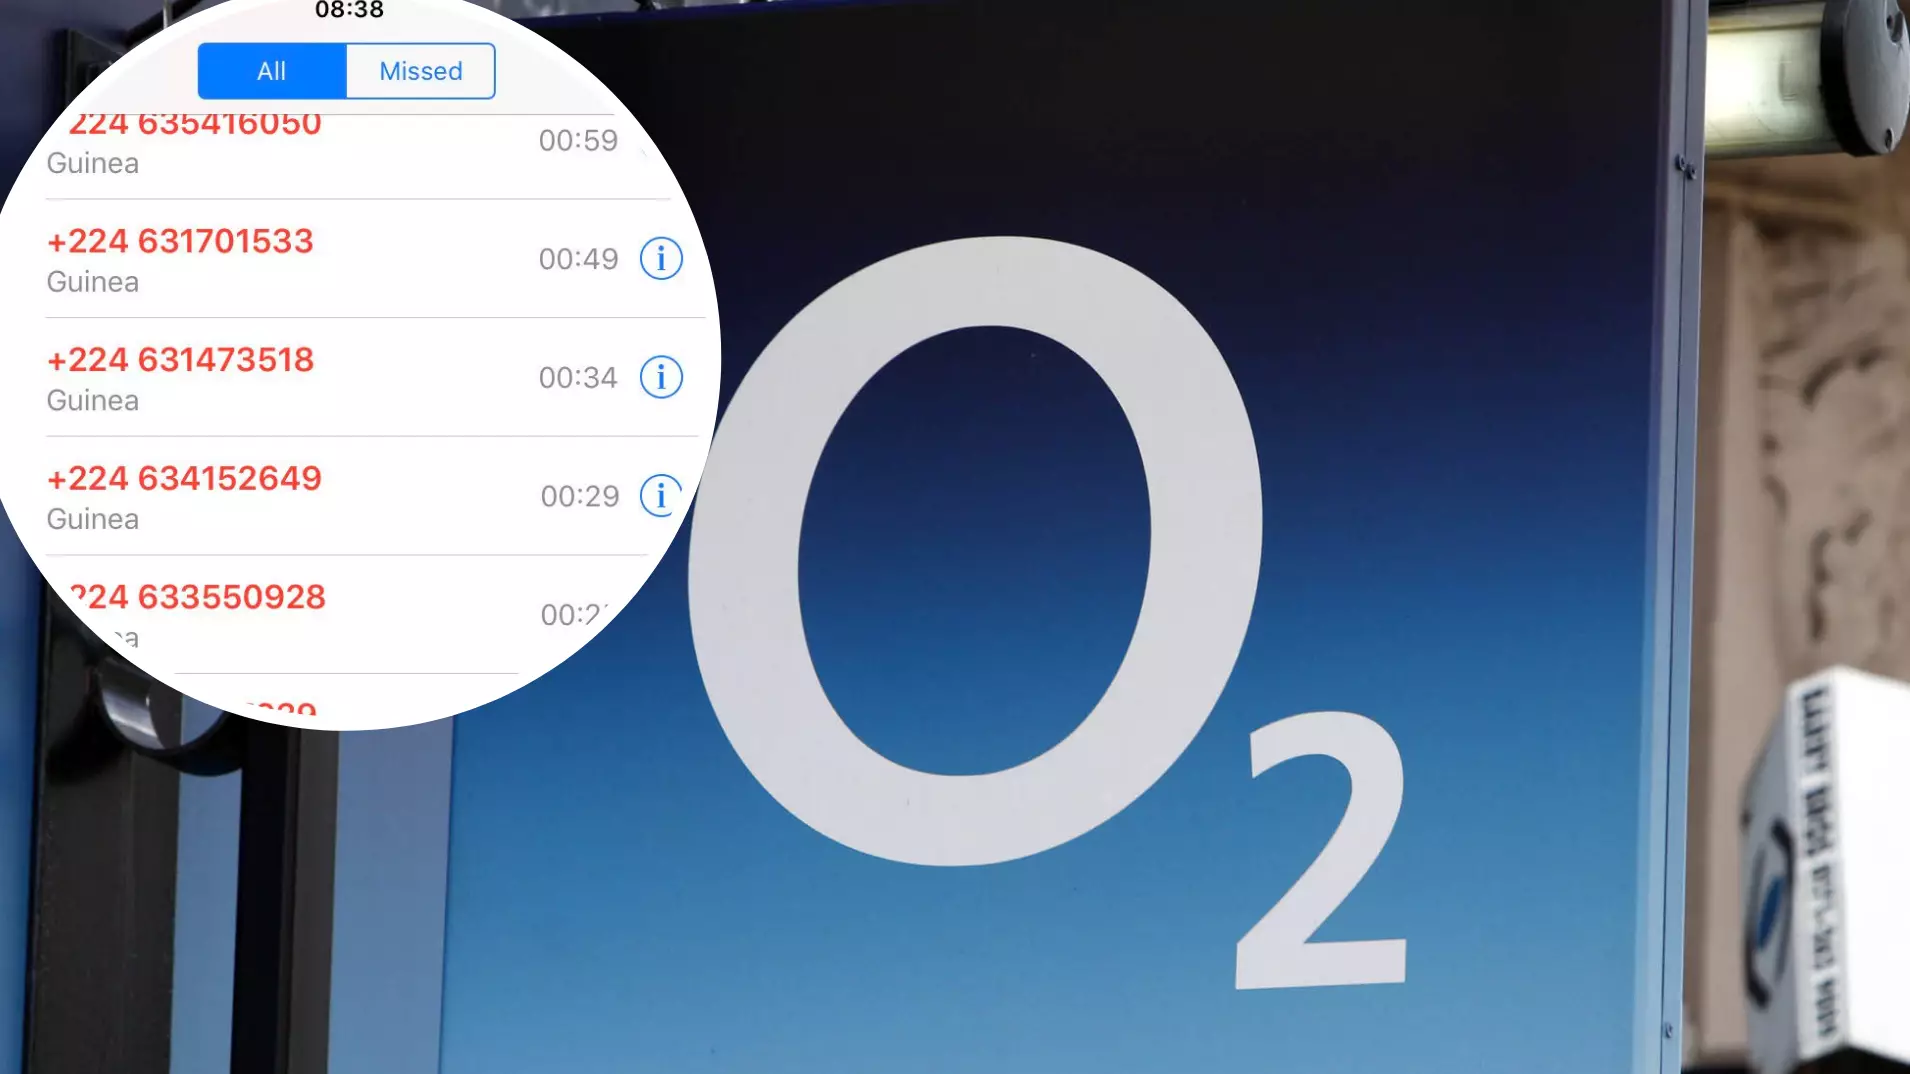 O2 Customers Urged To Check Their Accounts After Scam